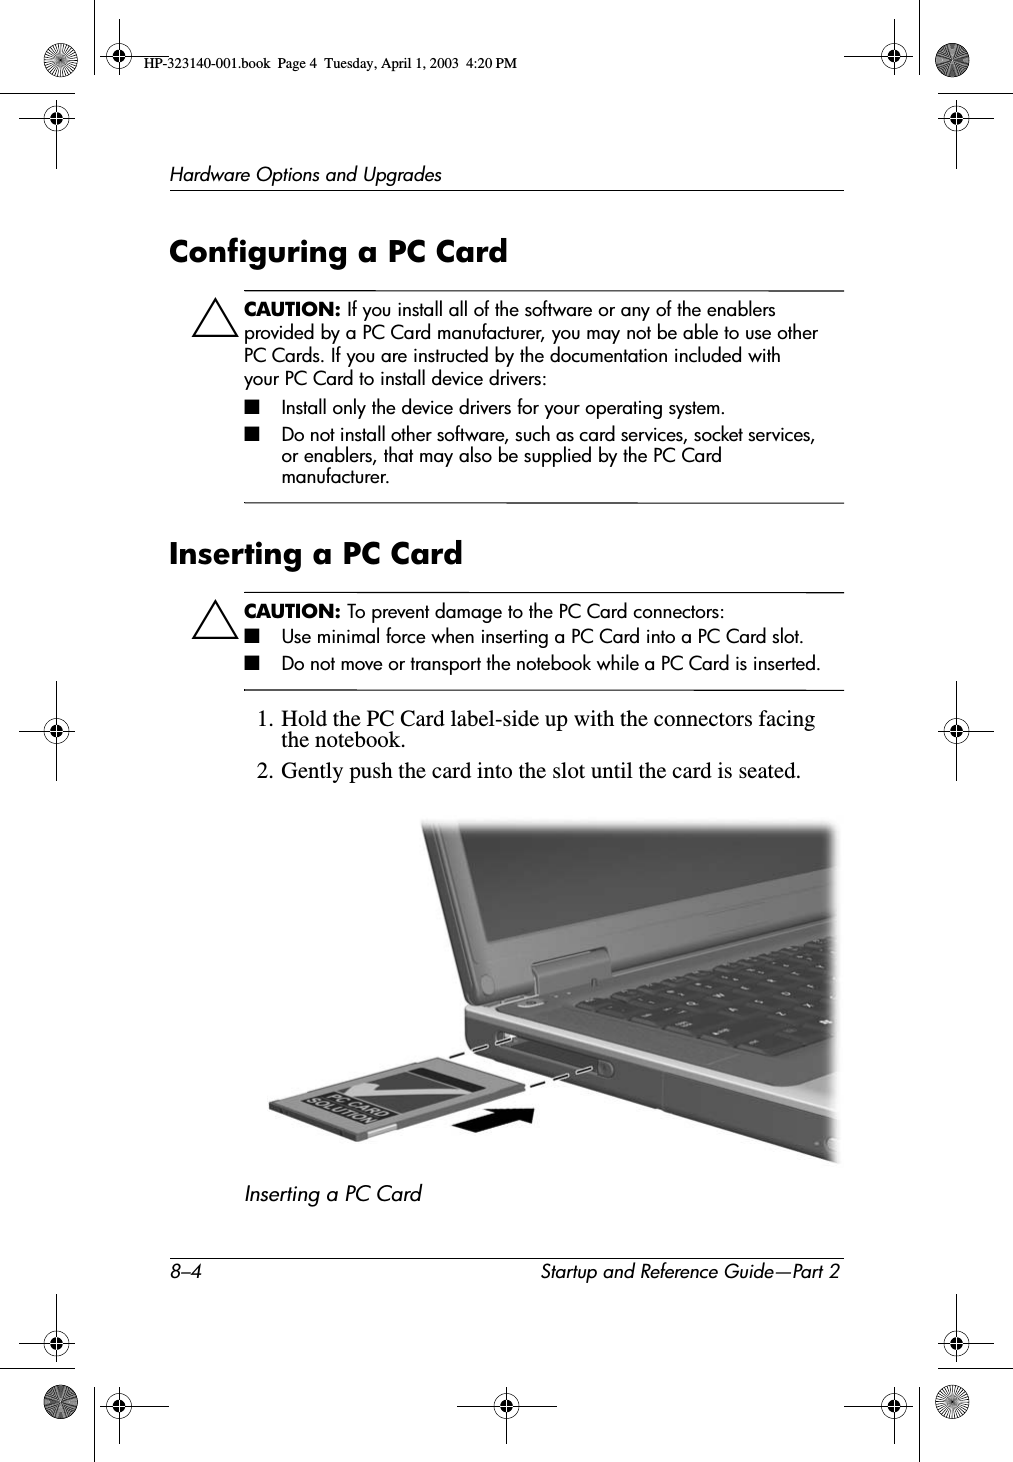 8–4 Startup and Reference Guide—Part 2Hardware Options and UpgradesConfiguring a PC CardÄCAUTION: If you install all of the software or any of the enablers provided by a PC Card manufacturer, you may not be able to use other PC Cards. If you are instructed by the documentation included with your PC Card to install device drivers:■Install only the device drivers for your operating system.■Do not install other software, such as card services, socket services, or enablers, that may also be supplied by the PC Card manufacturer.Inserting a PC CardÄCAUTION: To prevent damage to the PC Card connectors:■Use minimal force when inserting a PC Card into a PC Card slot.■Do not move or transport the notebook while a PC Card is inserted.1. Hold the PC Card label-side up with the connectors facing the notebook.2. Gently push the card into the slot until the card is seated.Inserting a PC Card HP-323140-001.book  Page 4  Tuesday, April 1, 2003  4:20 PM